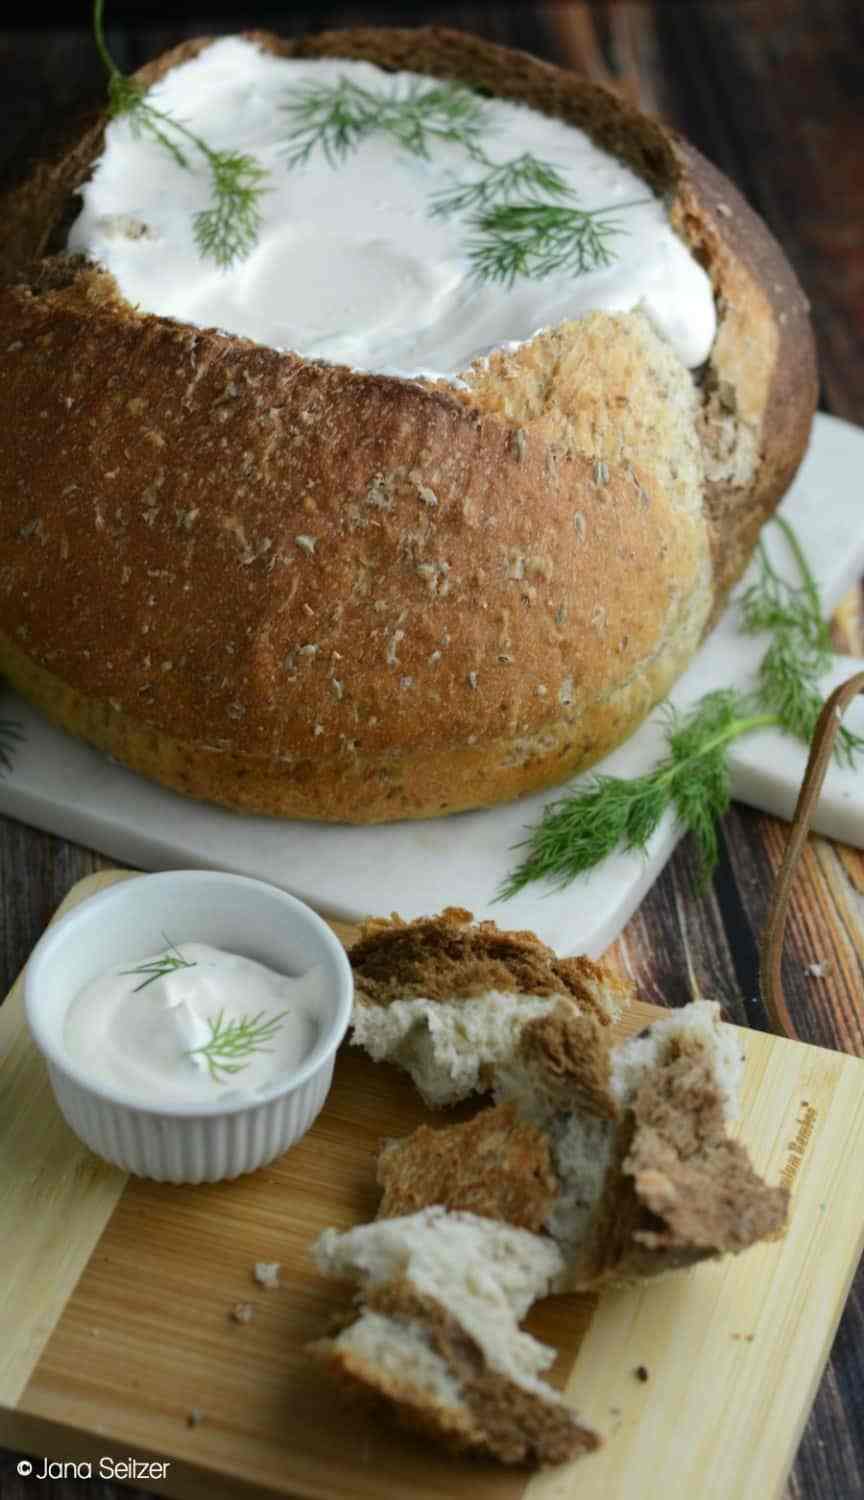 Dill Dip With Rye Bread